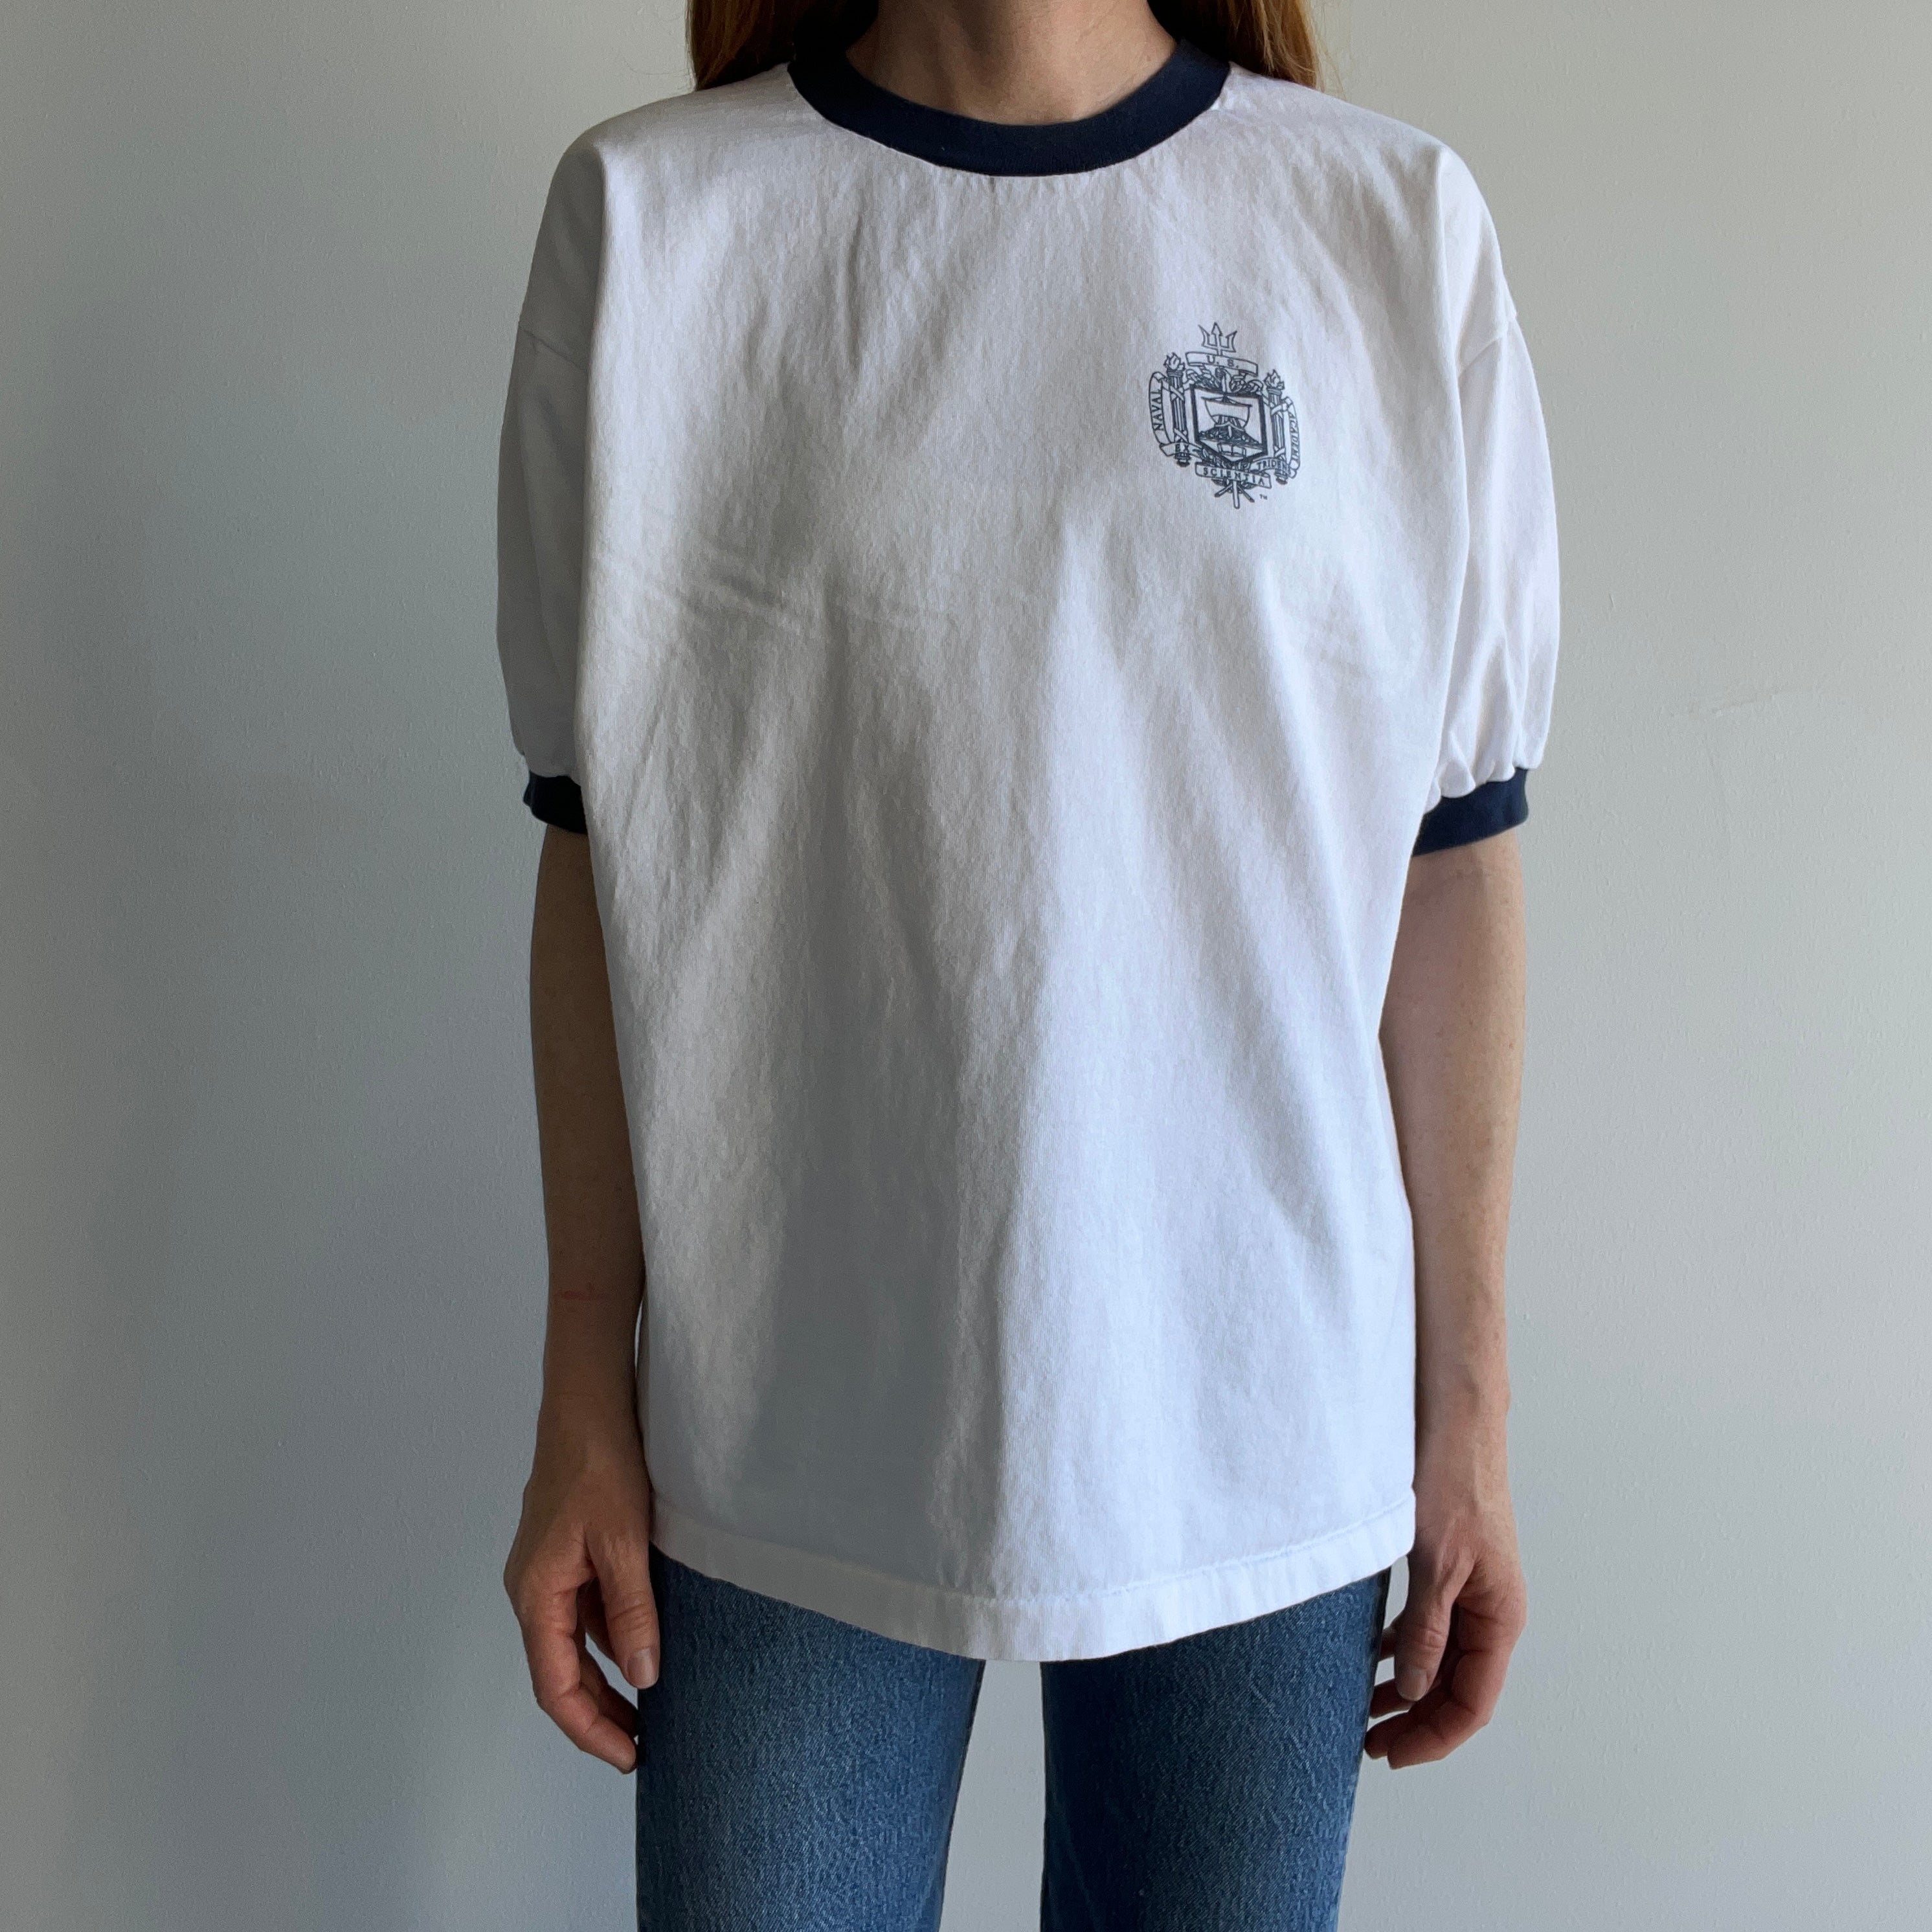 1980/90s US Naval Academy Cotton Ring T-Shirt